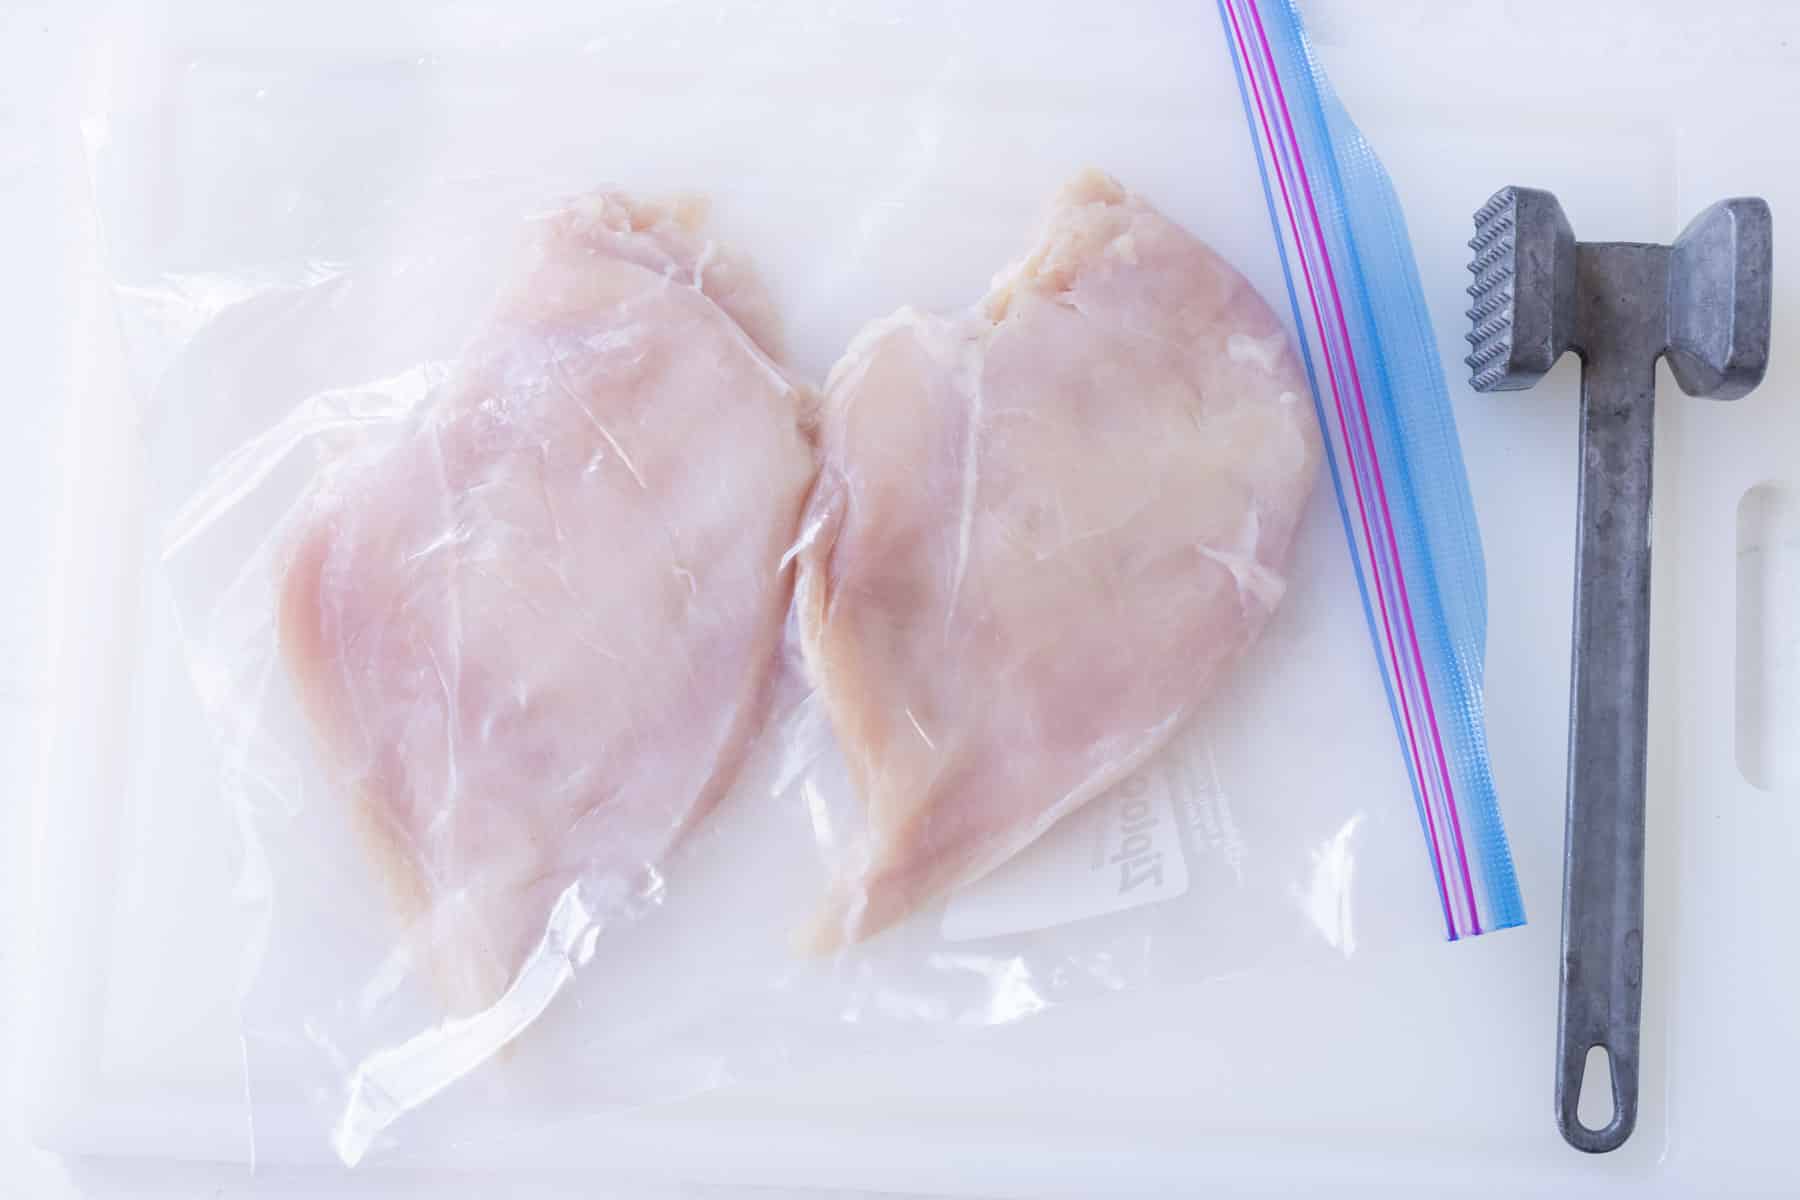 Chicken breasts are pounded thin in a bag.